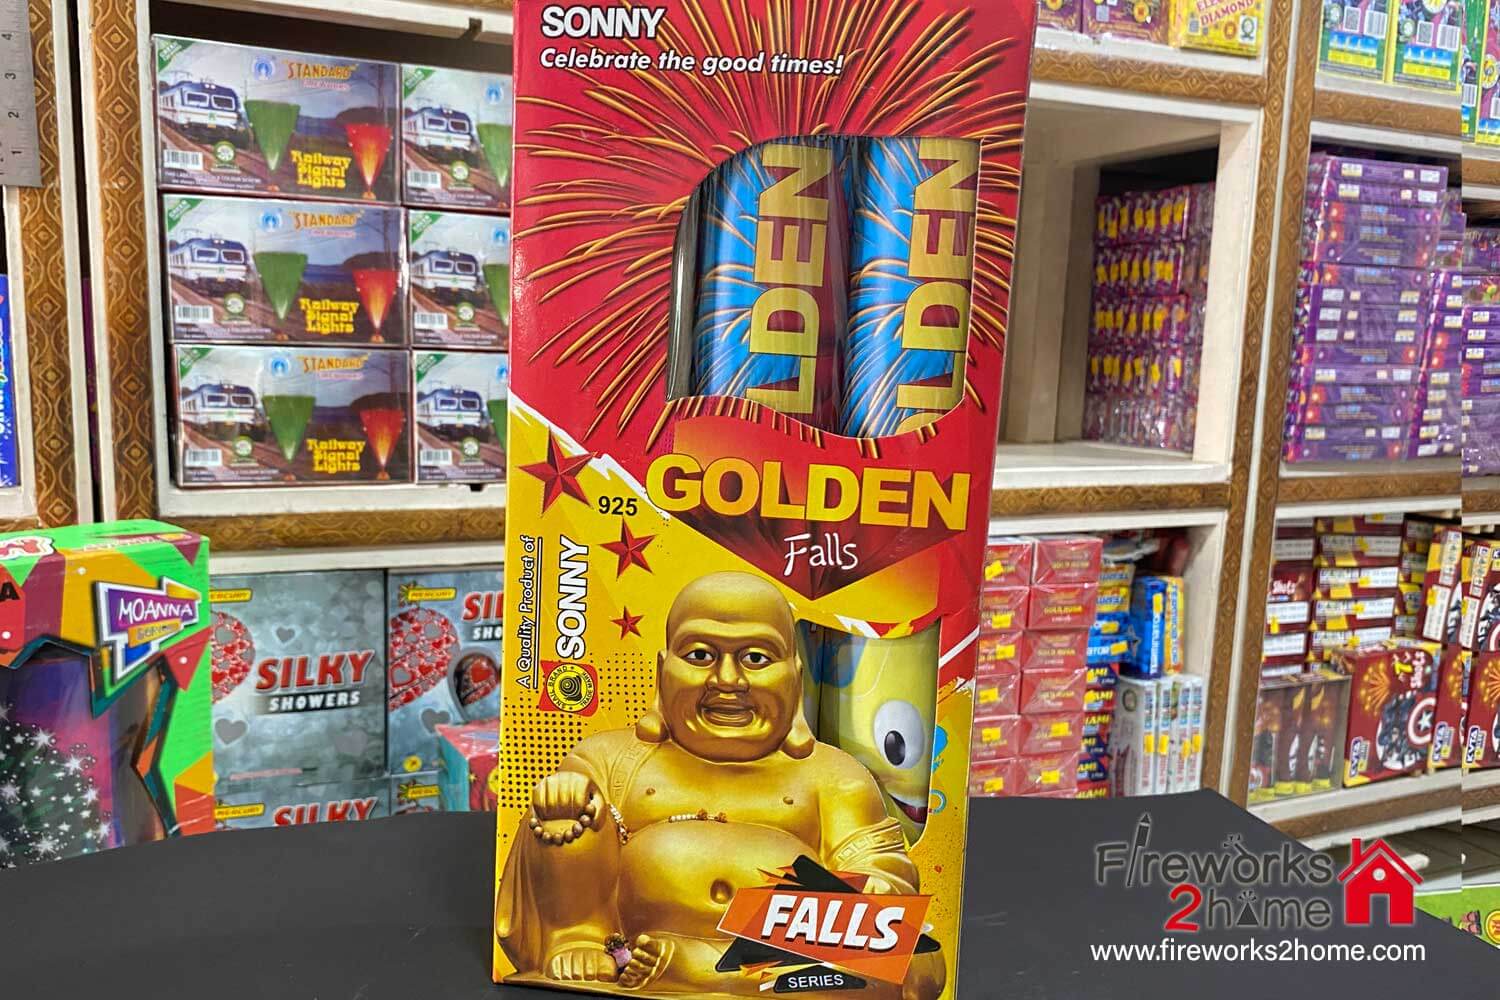 Golden Falls Sky Shot by Sony (pieces per box 2)